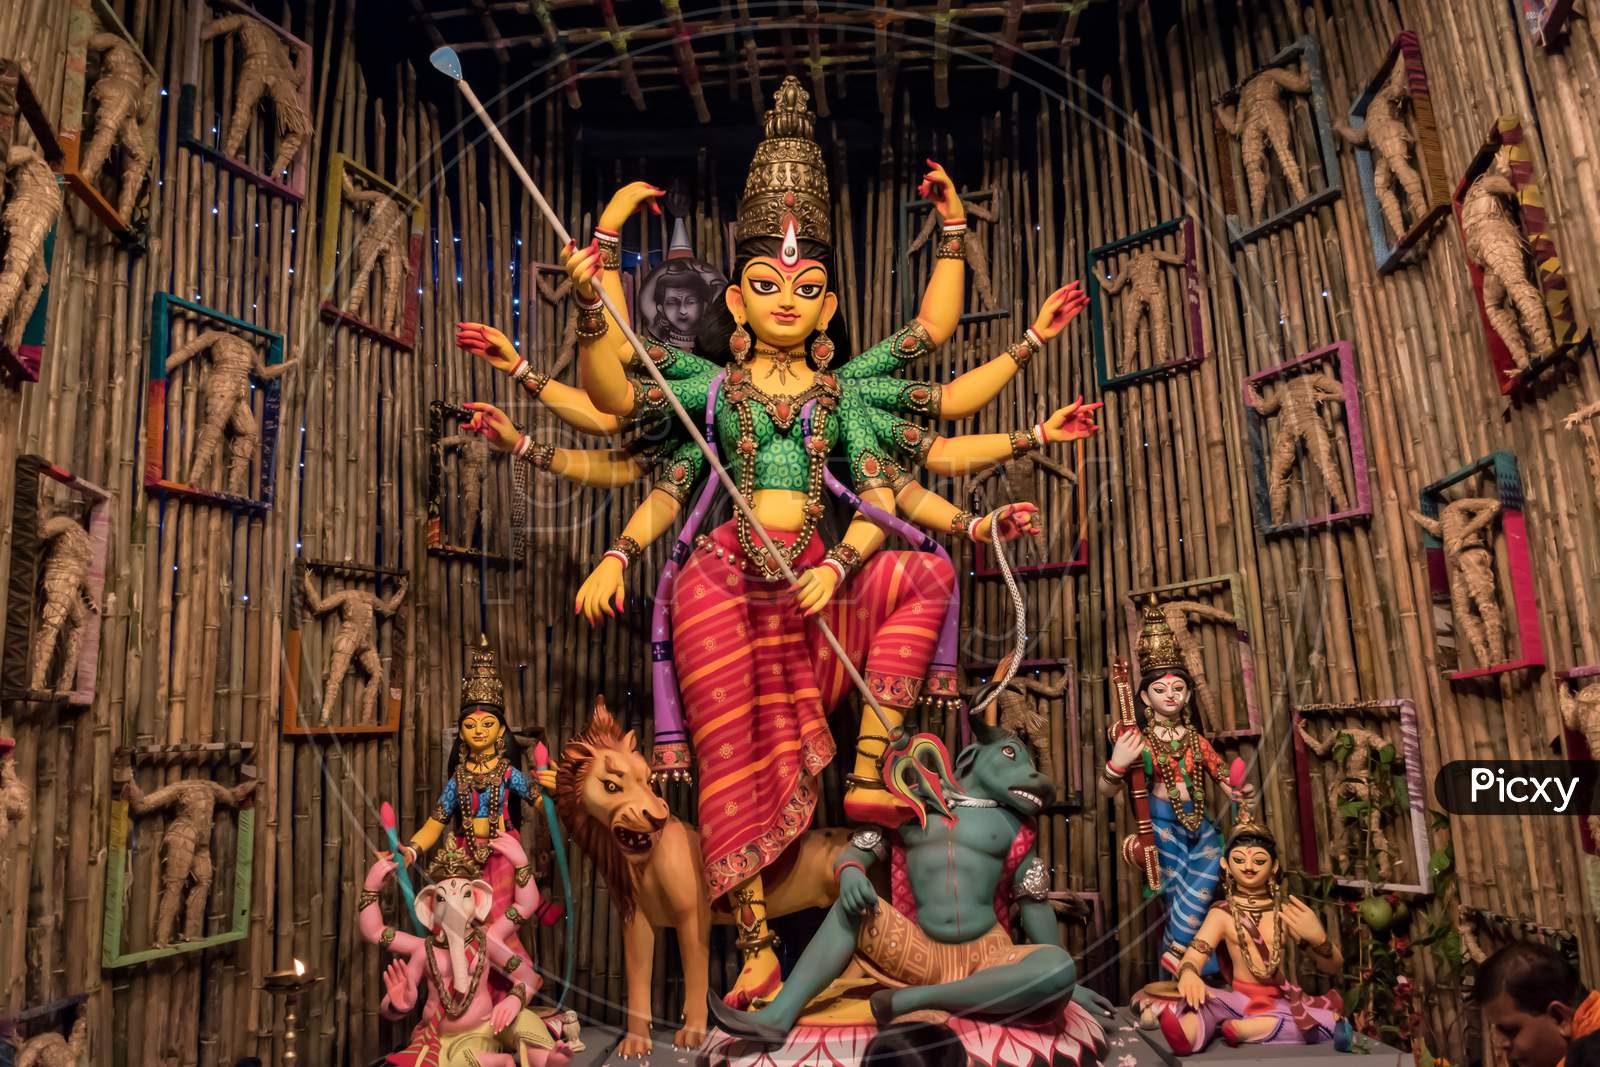 Goddess Durga Idol At Decorated Durga Puja Pandal, Shot At Colored Light, At Kolkata, West Bengal, India. Durga Puja Is Biggest Religious Festival Of Hinduism And Is Now Celebrated Worldwide